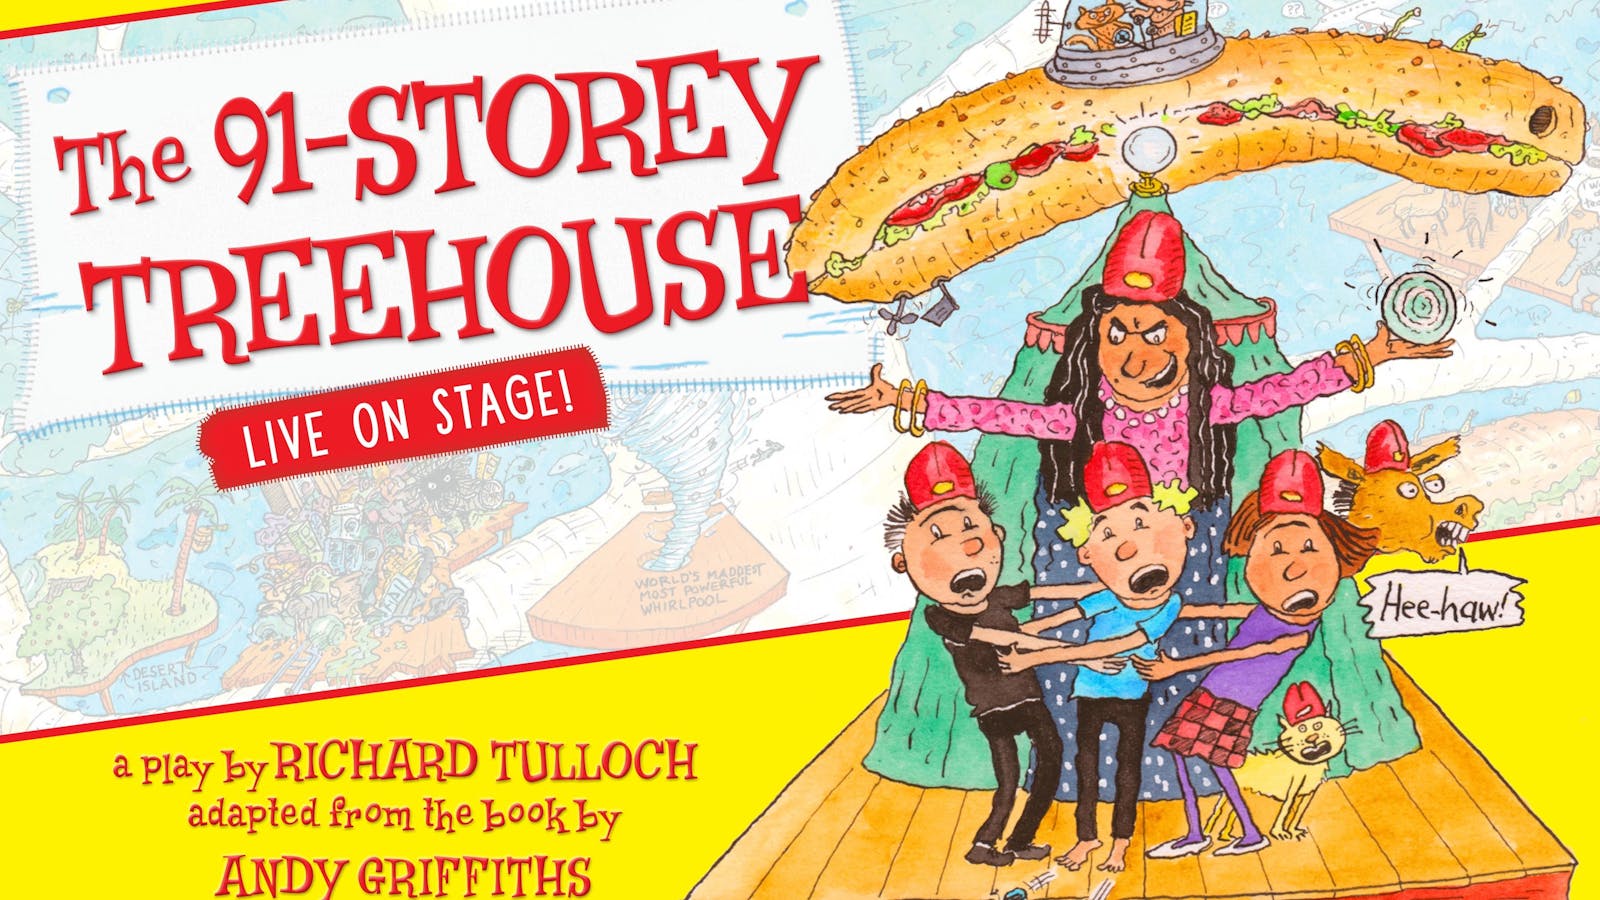 Image for The 91-Storey Treehouse